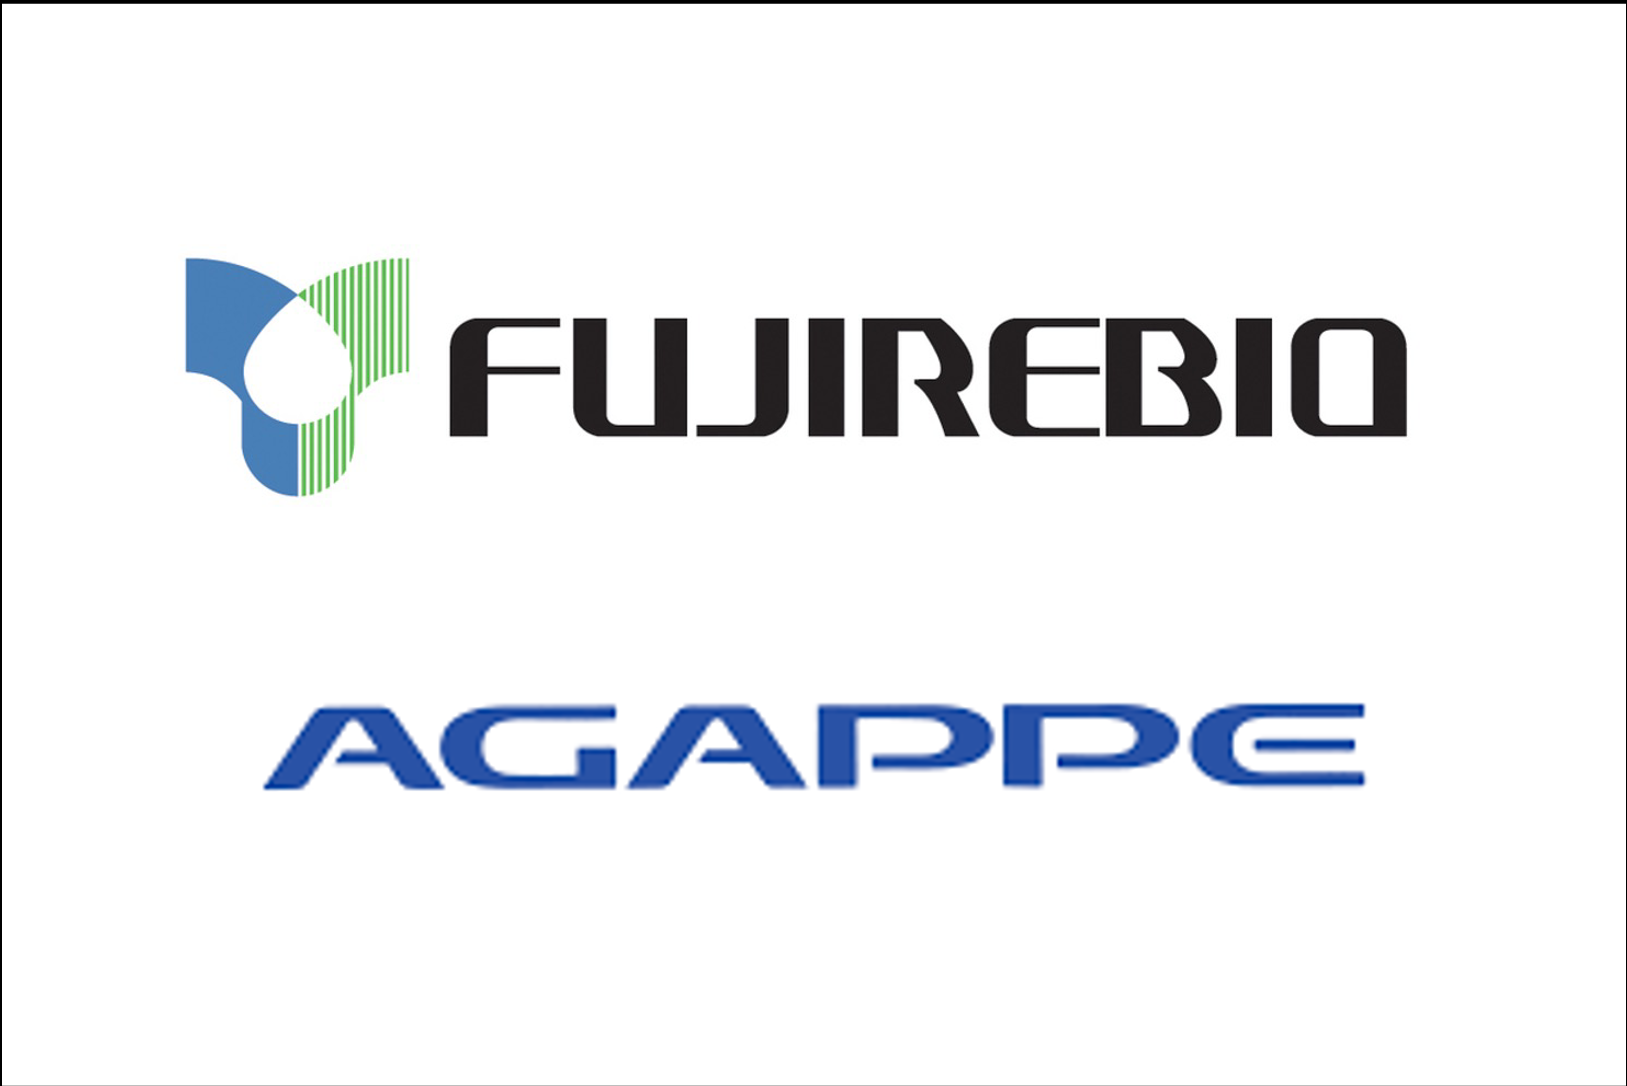 Fujirebio and Agappe enter into an agreement on business collaboration in the field of CLIA based immunoassay